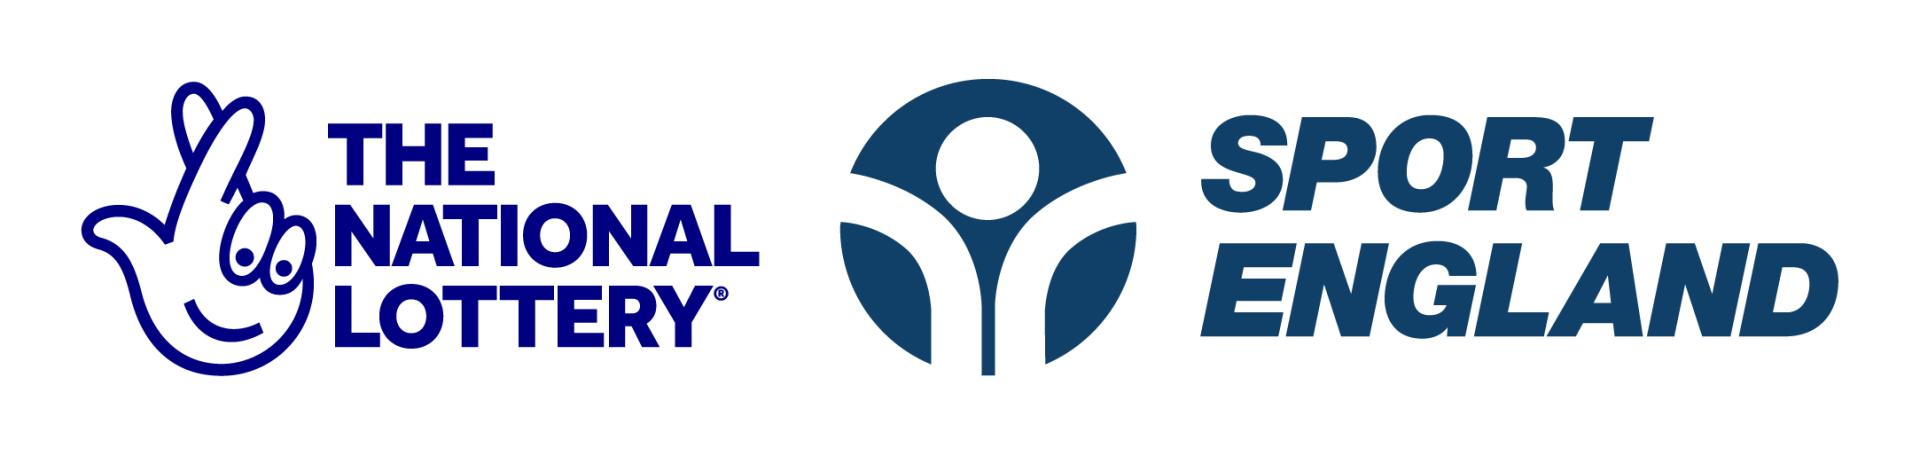 The National Lottery logo and Sport England logo